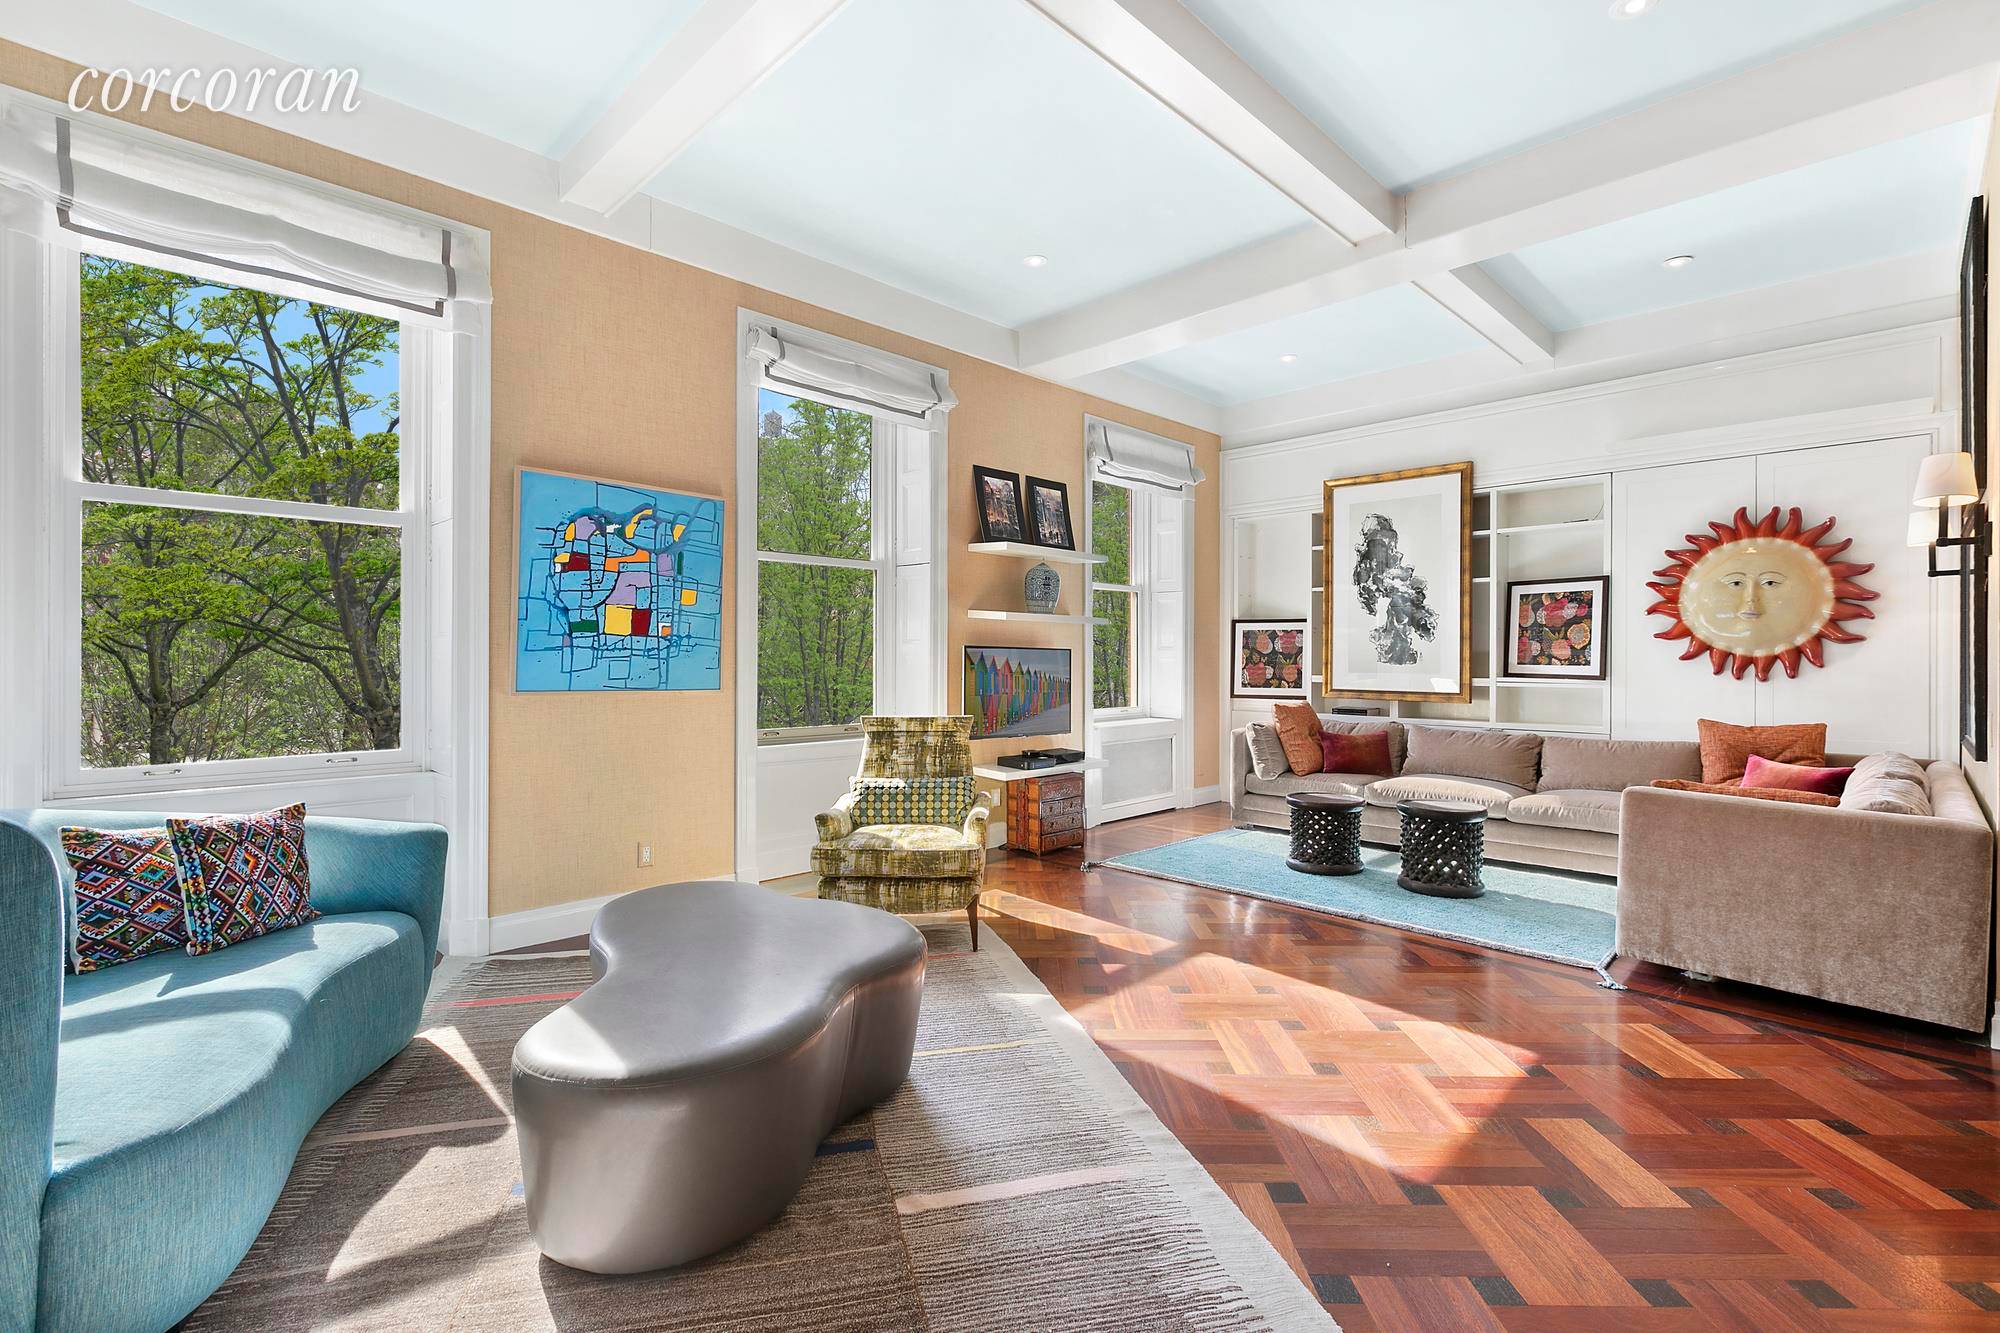 Rare opportunity to own an elegant three bedroom home facing the only private park in Manhattan.